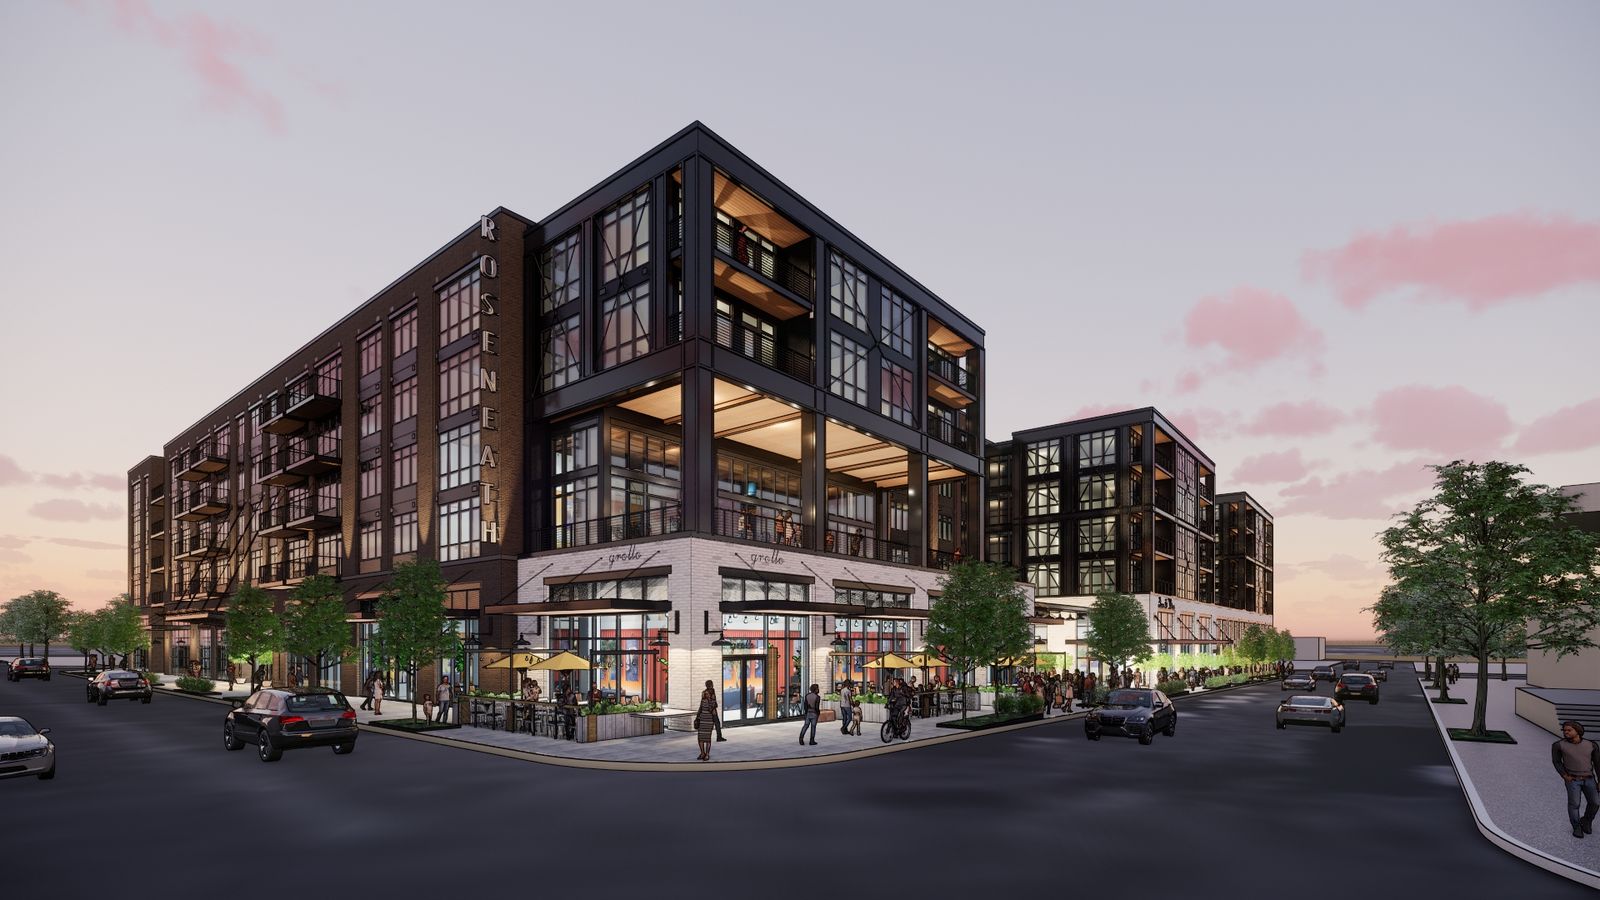 Construction Begins on New 350-Unit Mixed Use Apartment Community in Richmond’s Vibrant Scott's Addition Neighborhood 